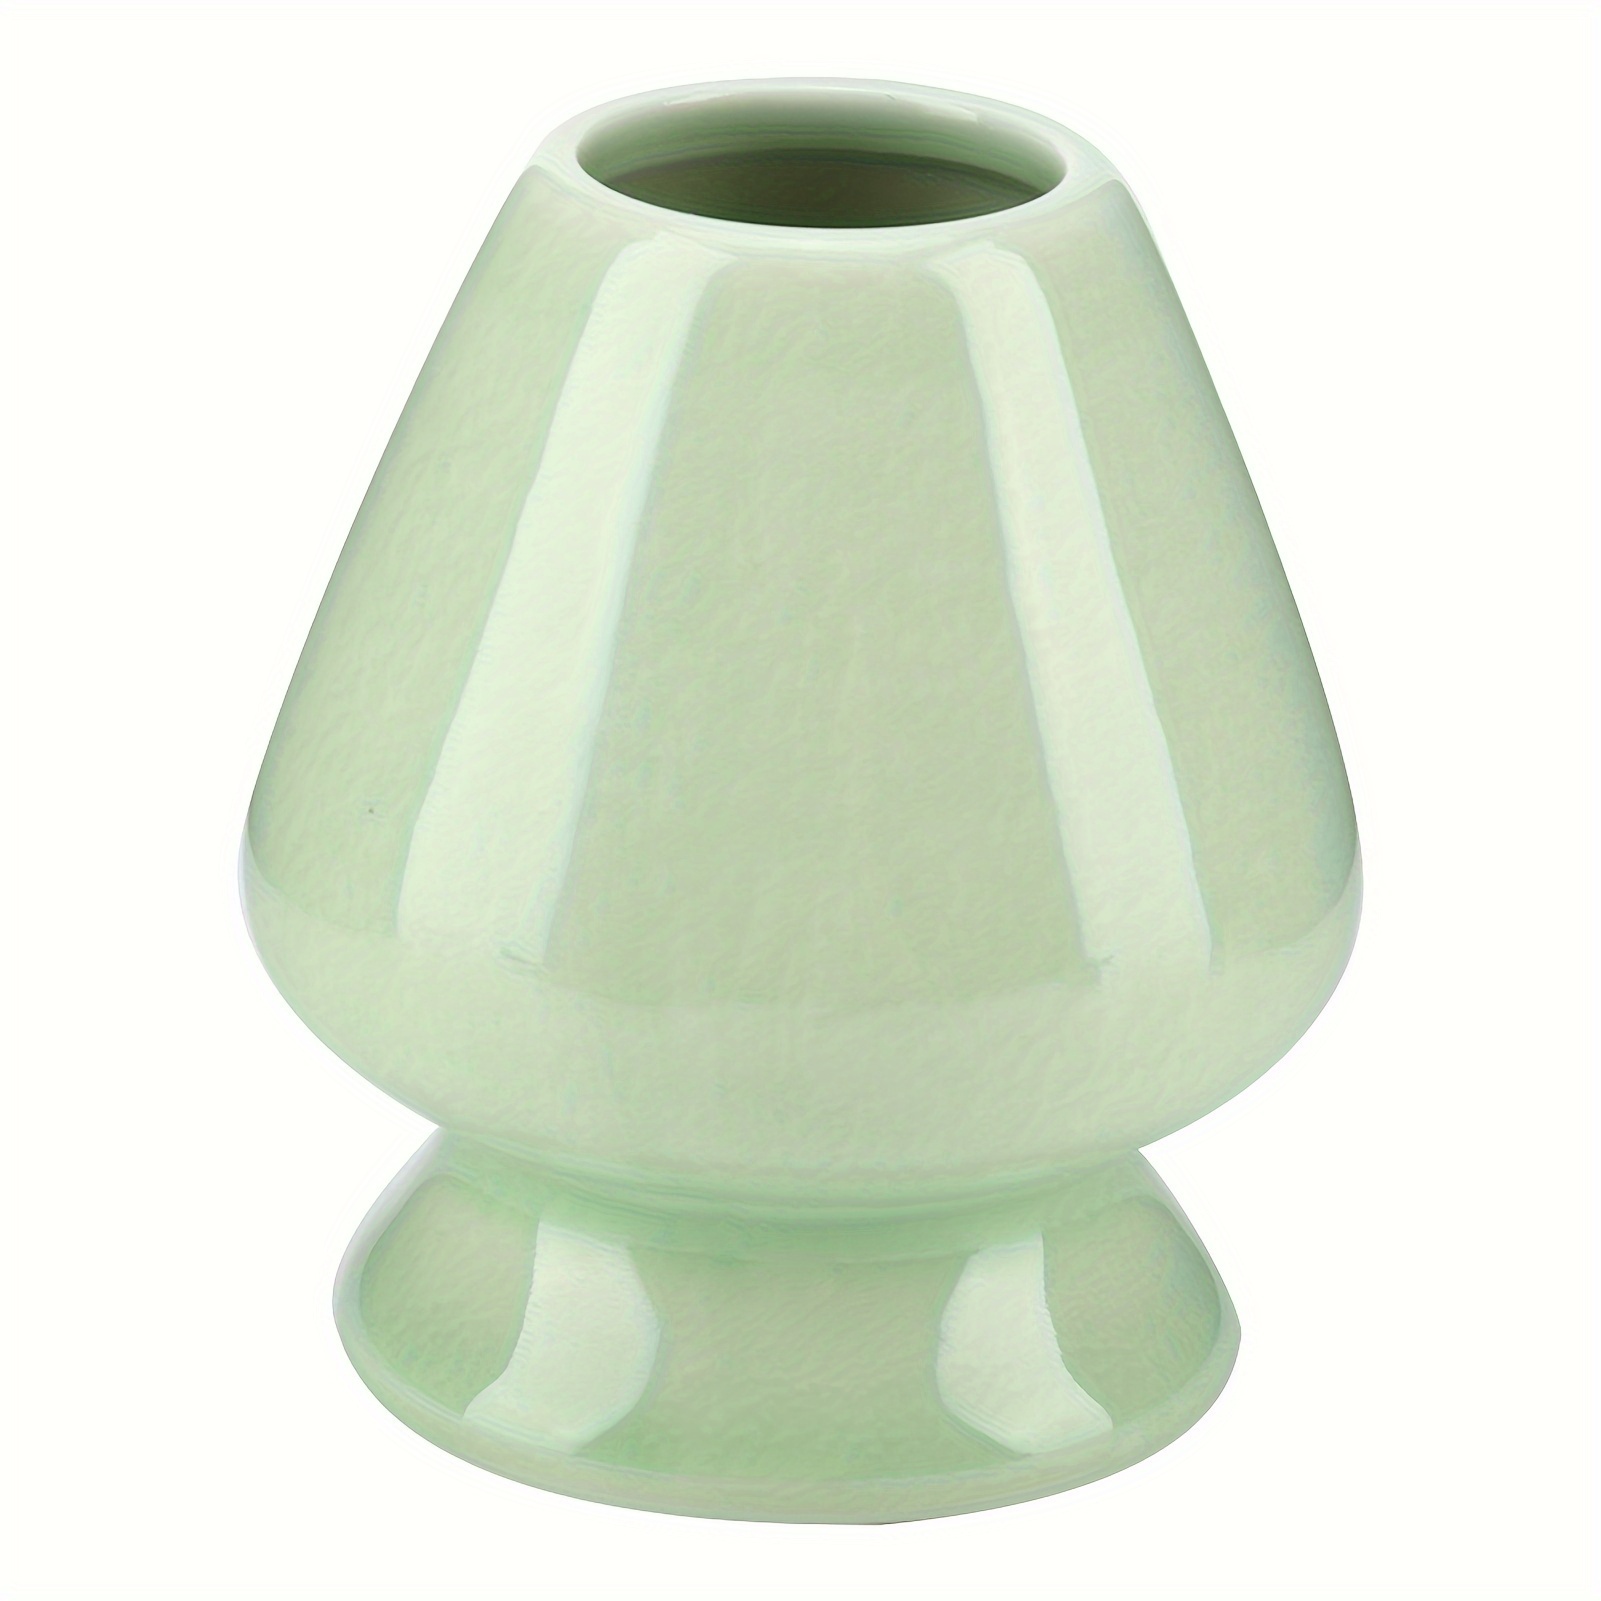 

1pc, Ceramic Matcha Whisk Holder, Japanese Tea Ceremony Accessory, , Traditional Chasen Stand, Green Tea Preparation Tool